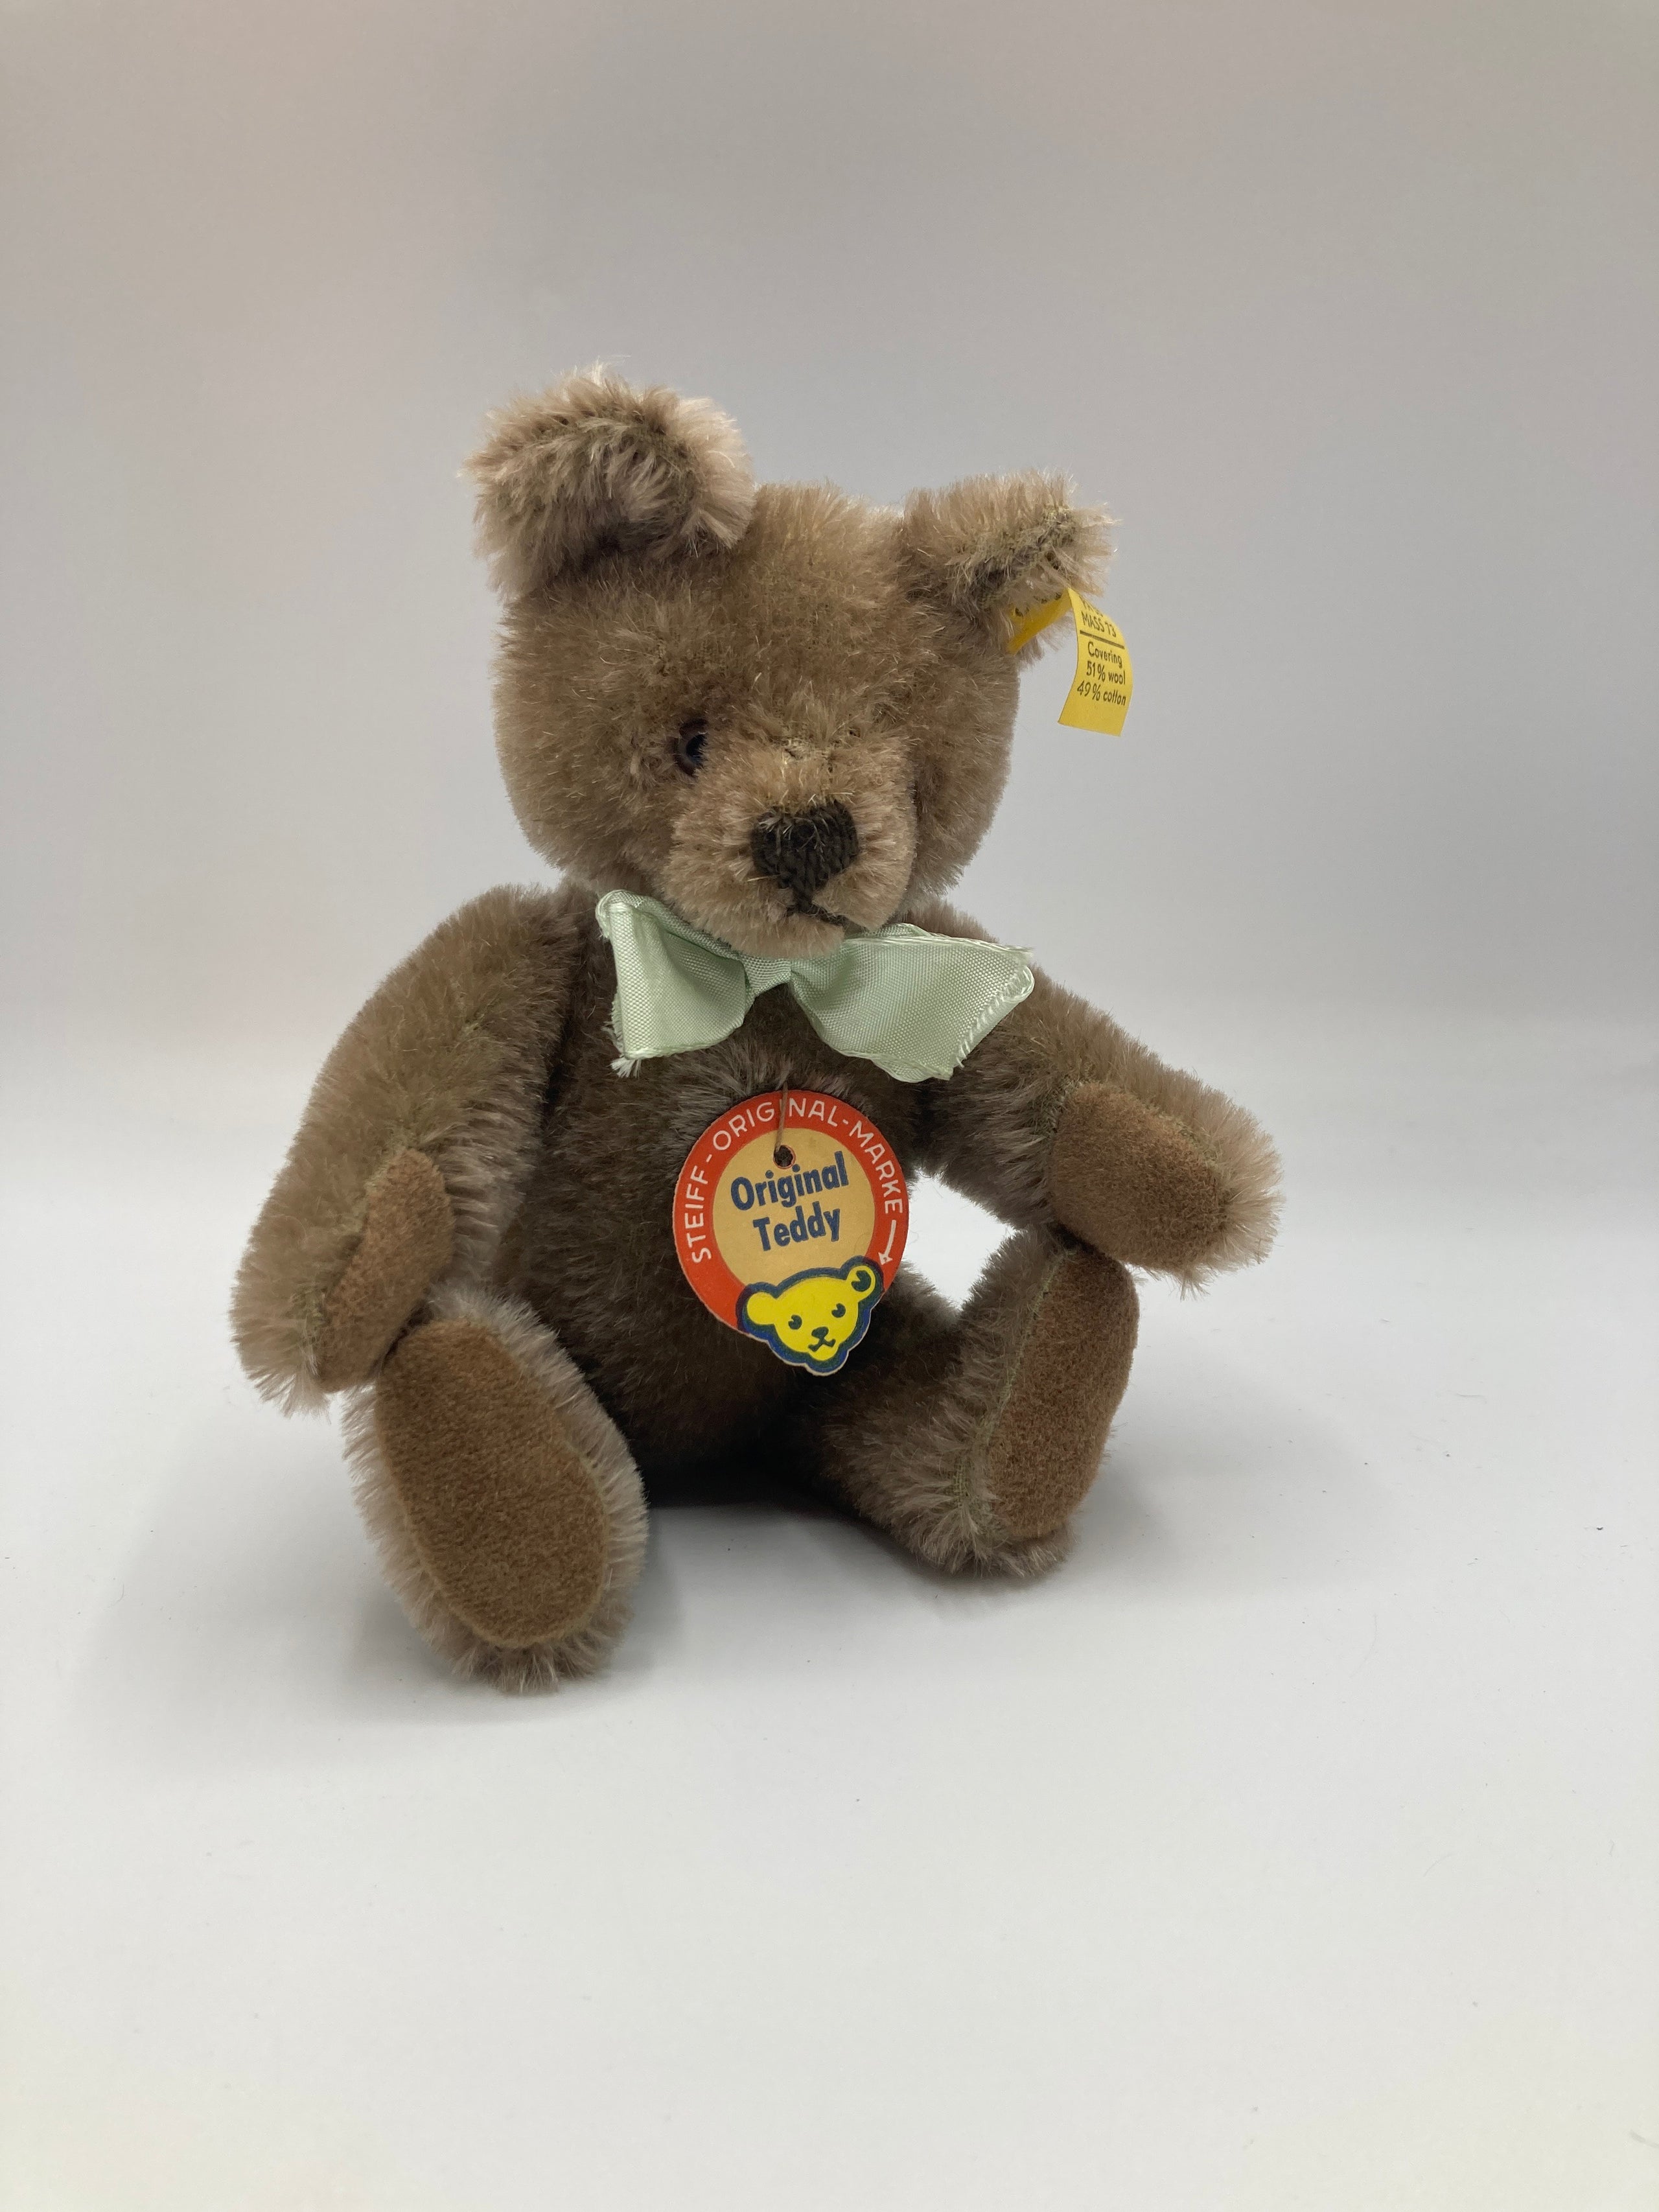 Steiff's Smaller Caramel Colored Original Teddy Bear With All IDs